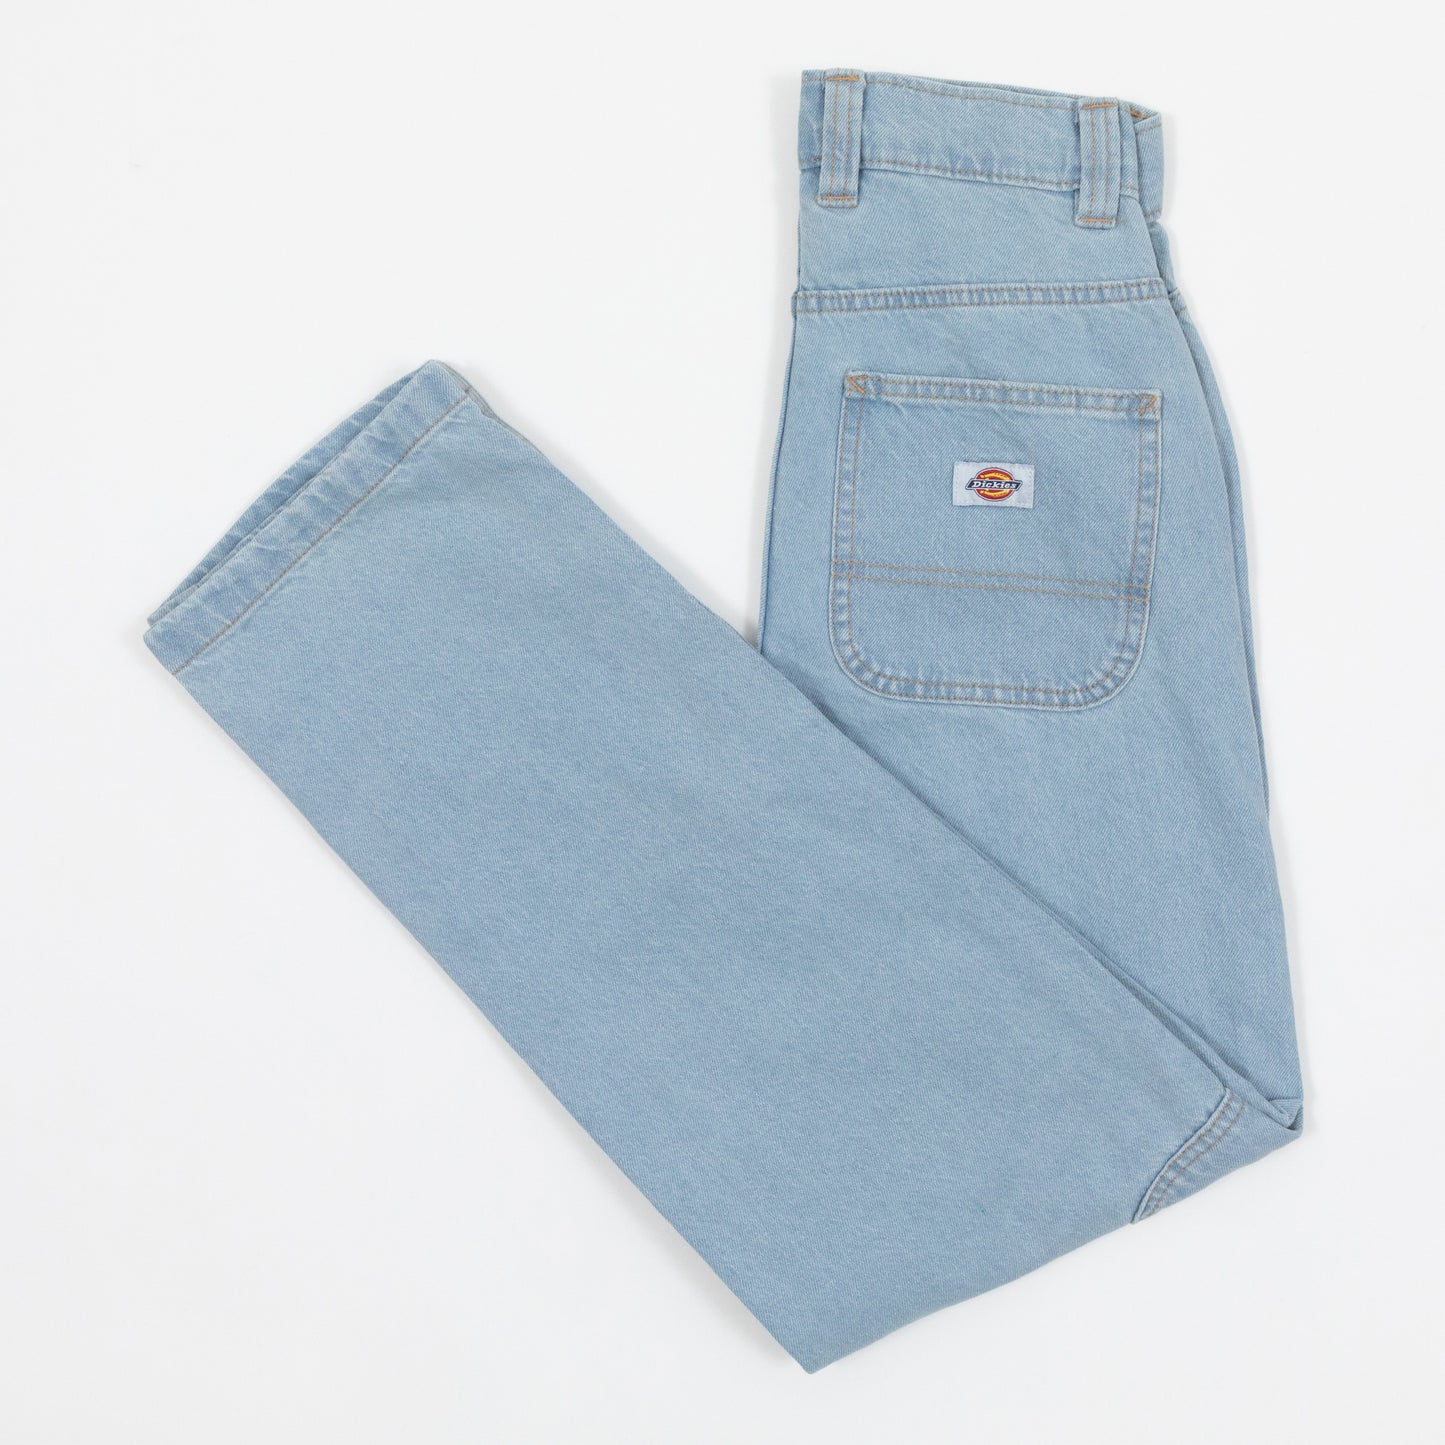 Womens DICKIES Madison Double Knee Denim Jeans in VINTAGE AGED BLUE